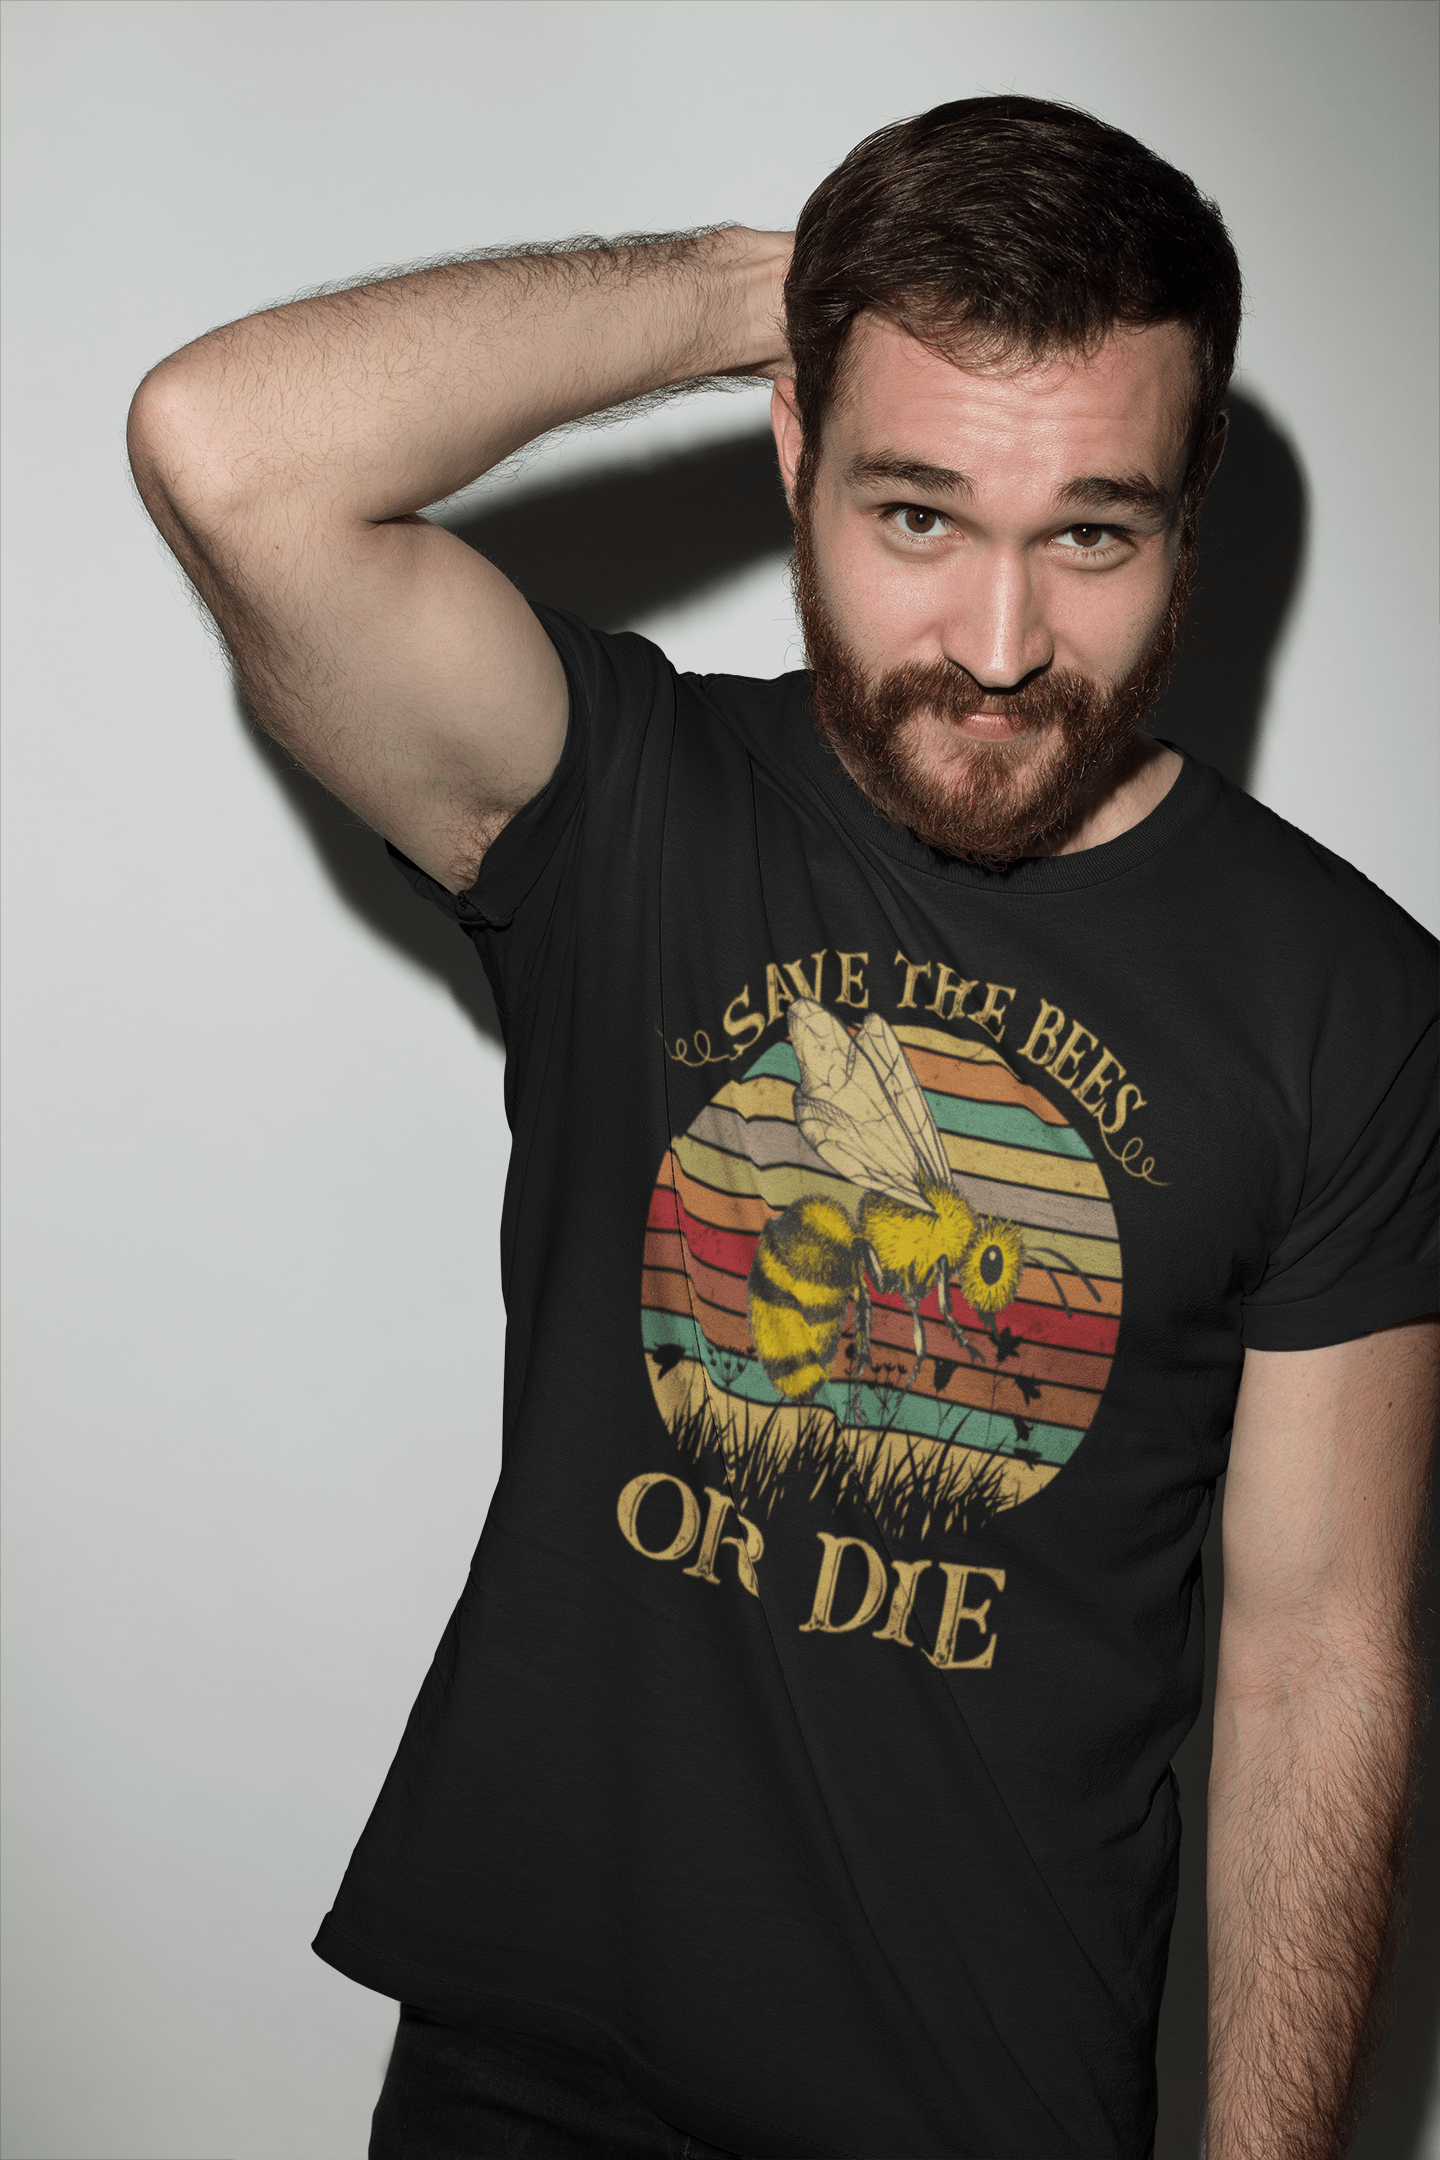 ULTRABASIC Men's Vintage T-Shirt Save the Bees or Die - Funny Retro Tee Shirt